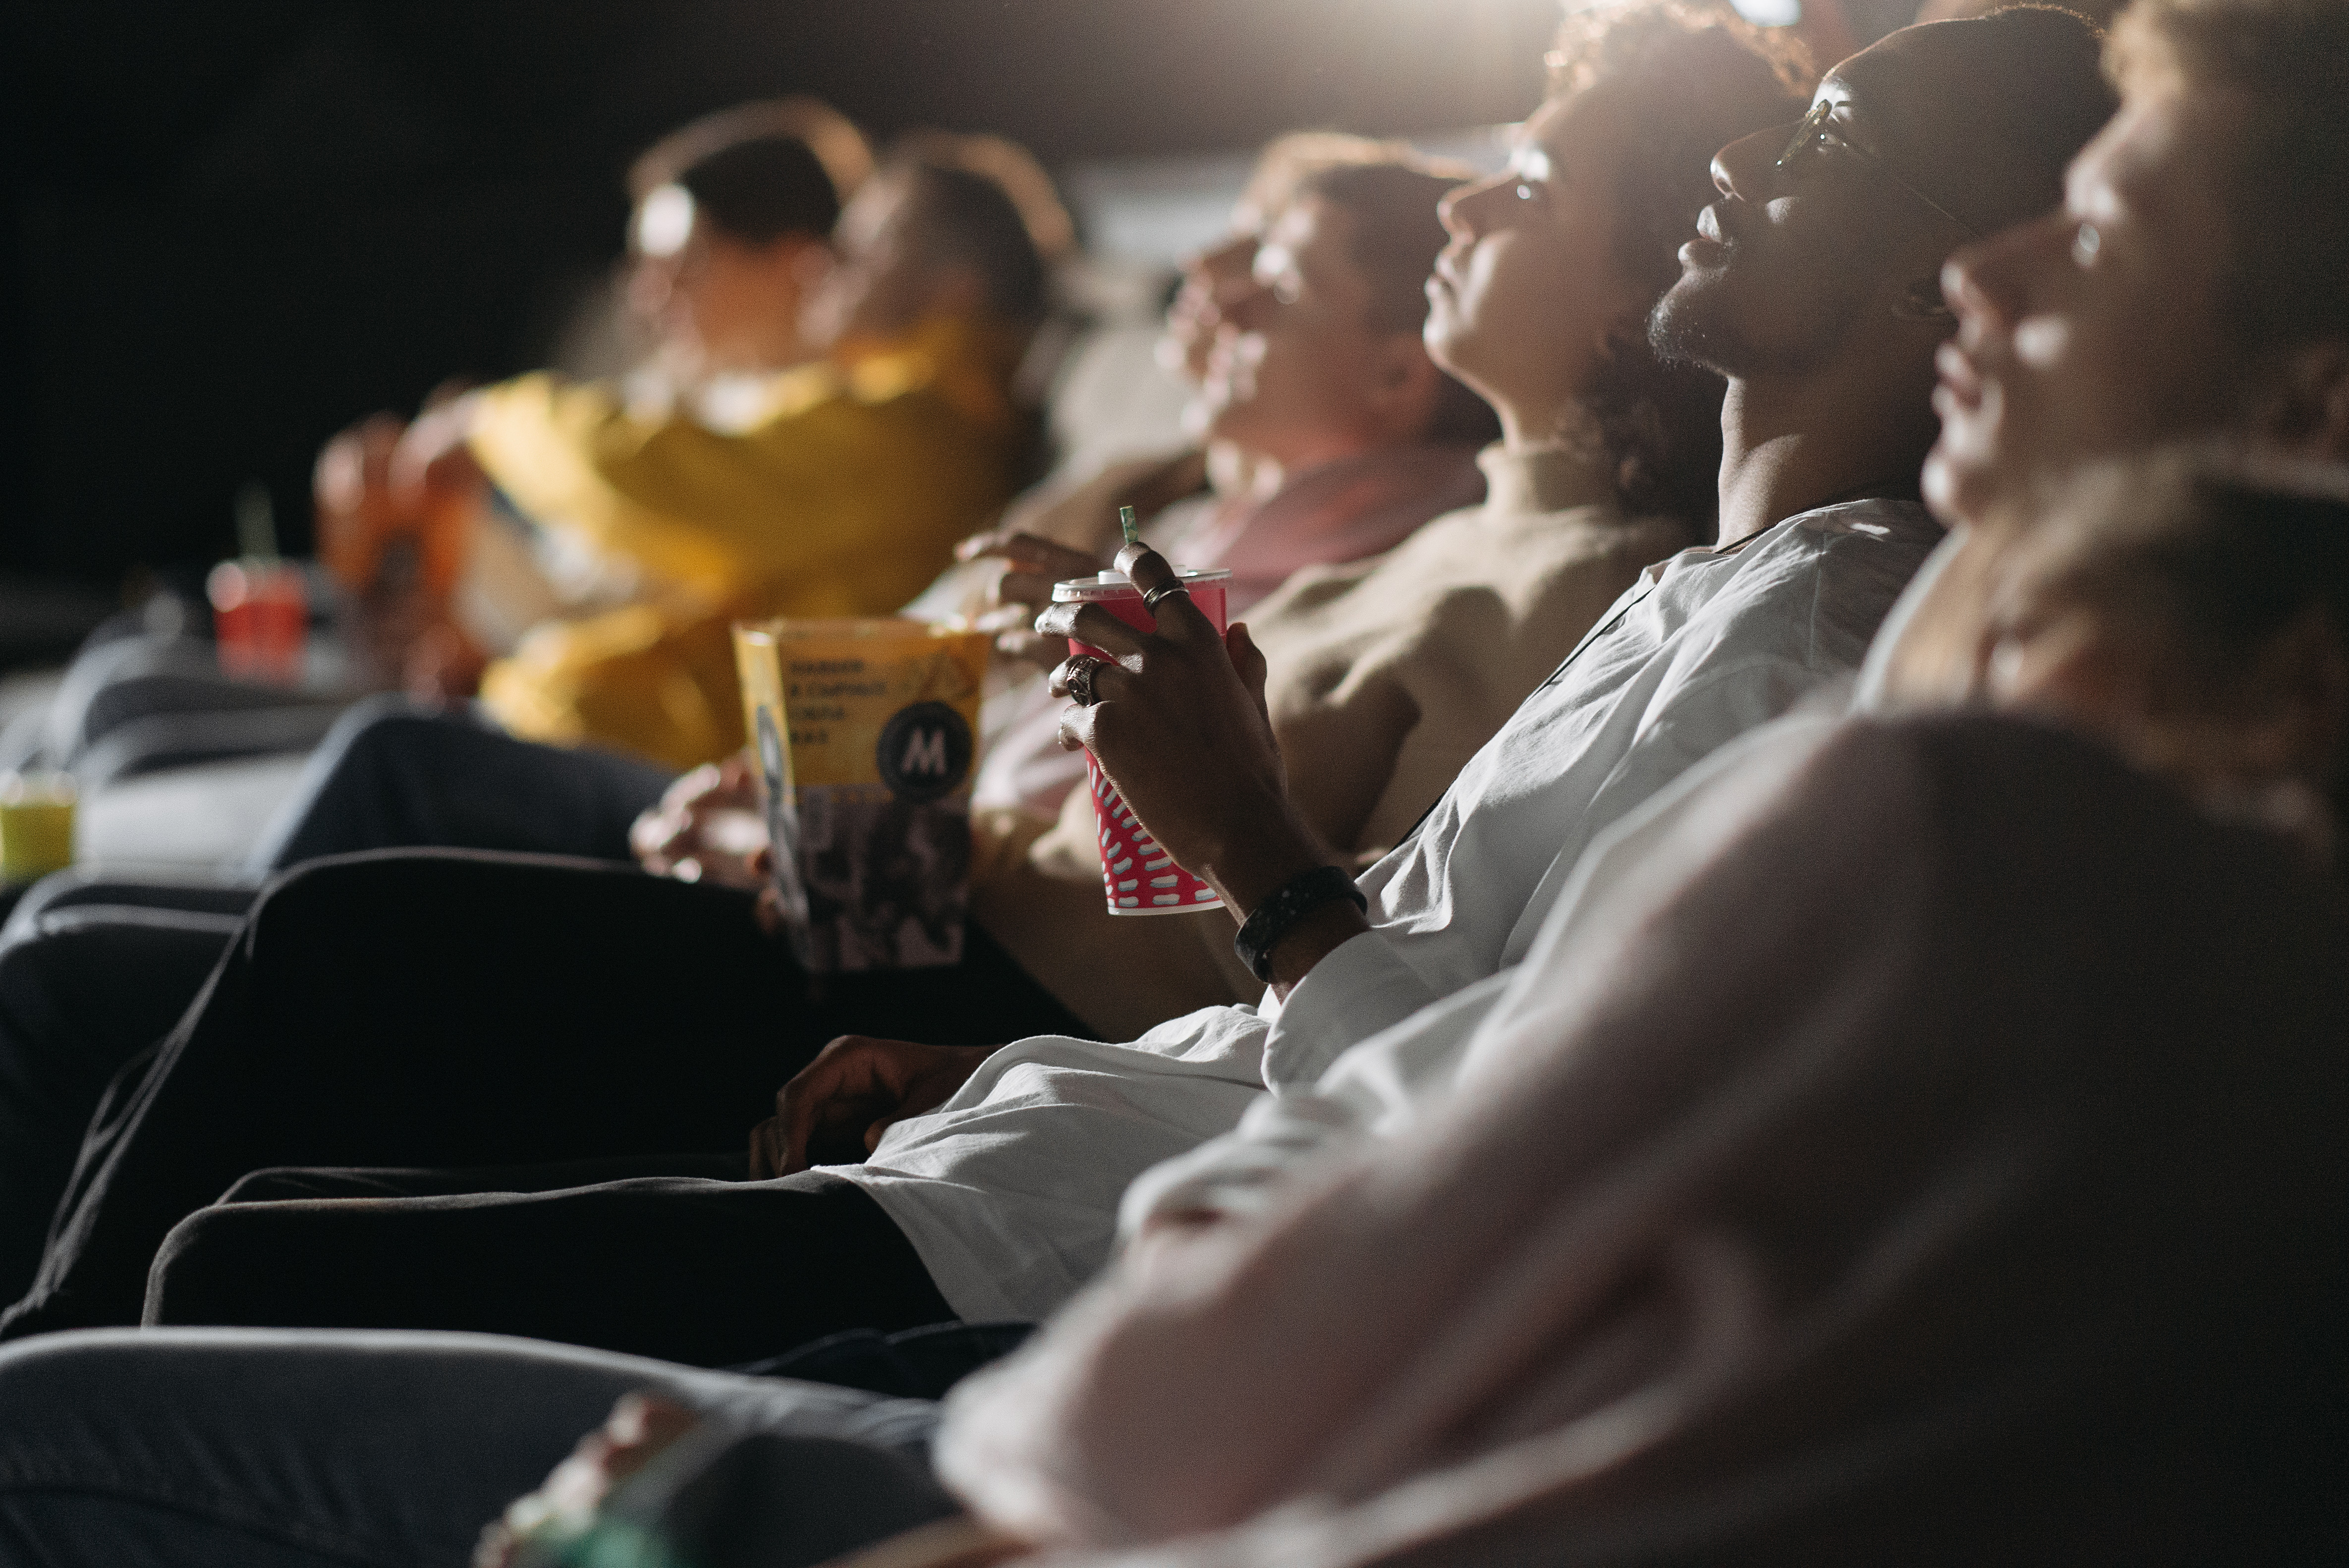 A photo of people watching a movie in a theater.